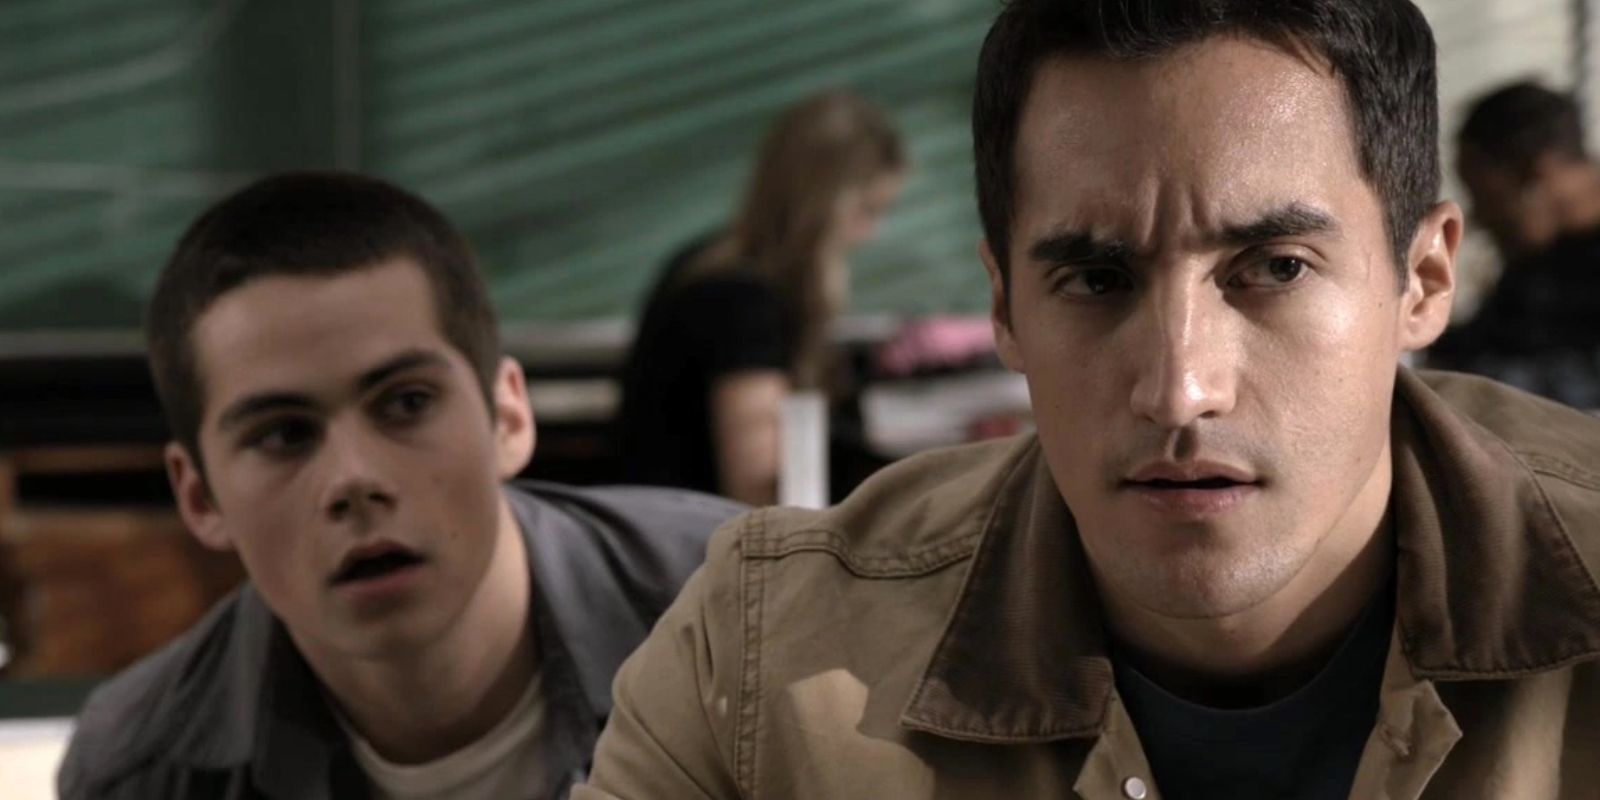 10 Most Unexpected Things To Happen in Teen Wolf